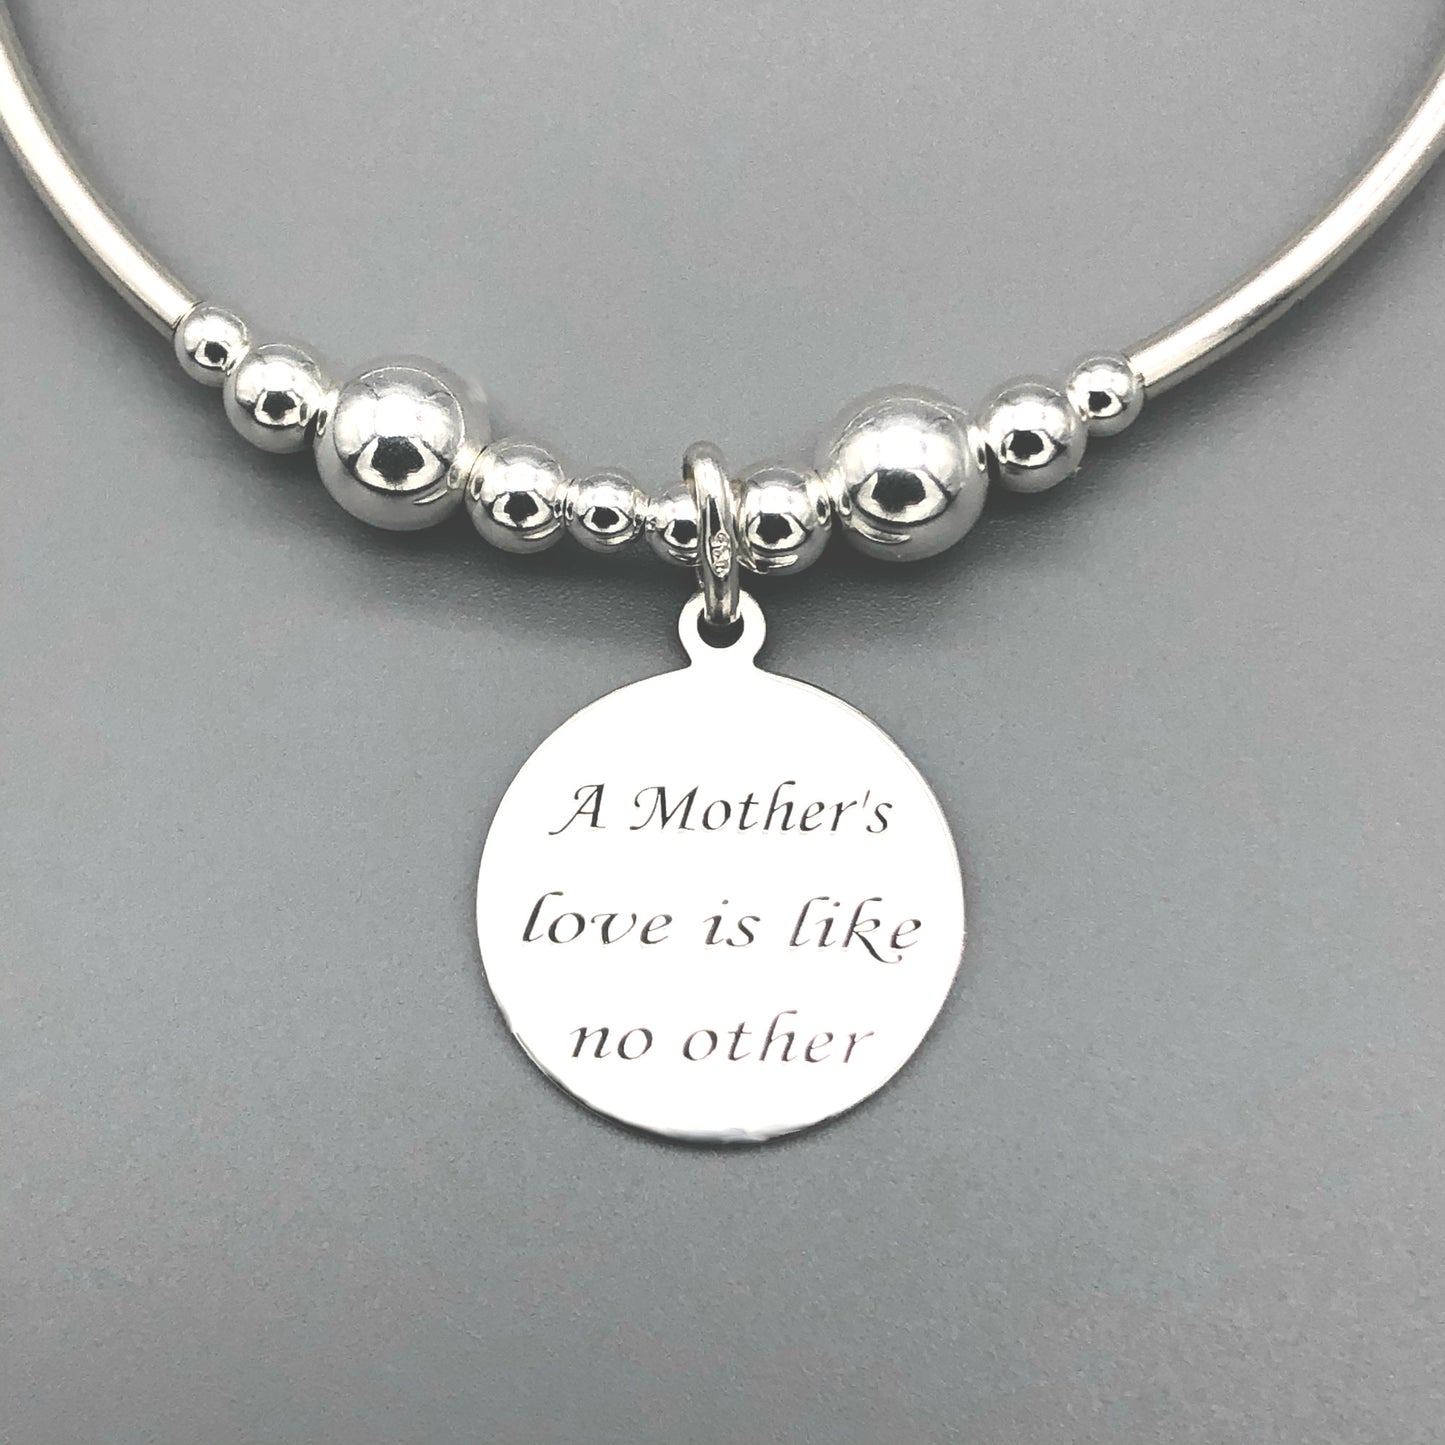 Closeup of "Mother's love is like no other" sterling silver women's charm bracelet by My Silver Wish